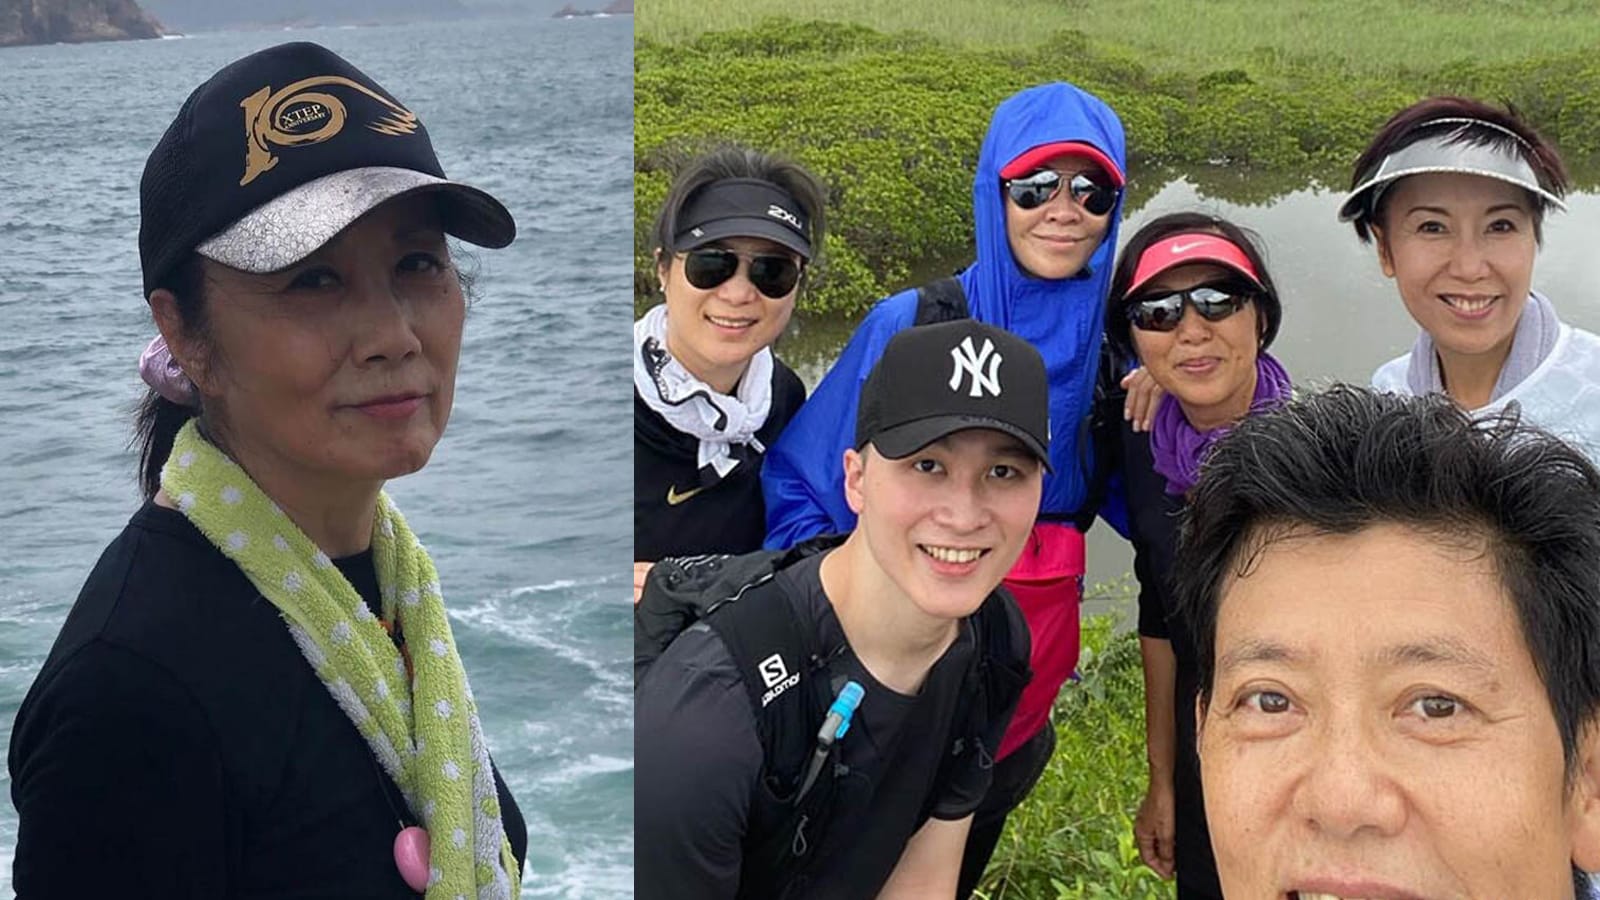 Carina Lau & Liza Wang Accused By Netizens Of Breaking The Law For Not Wearing Masks In Public